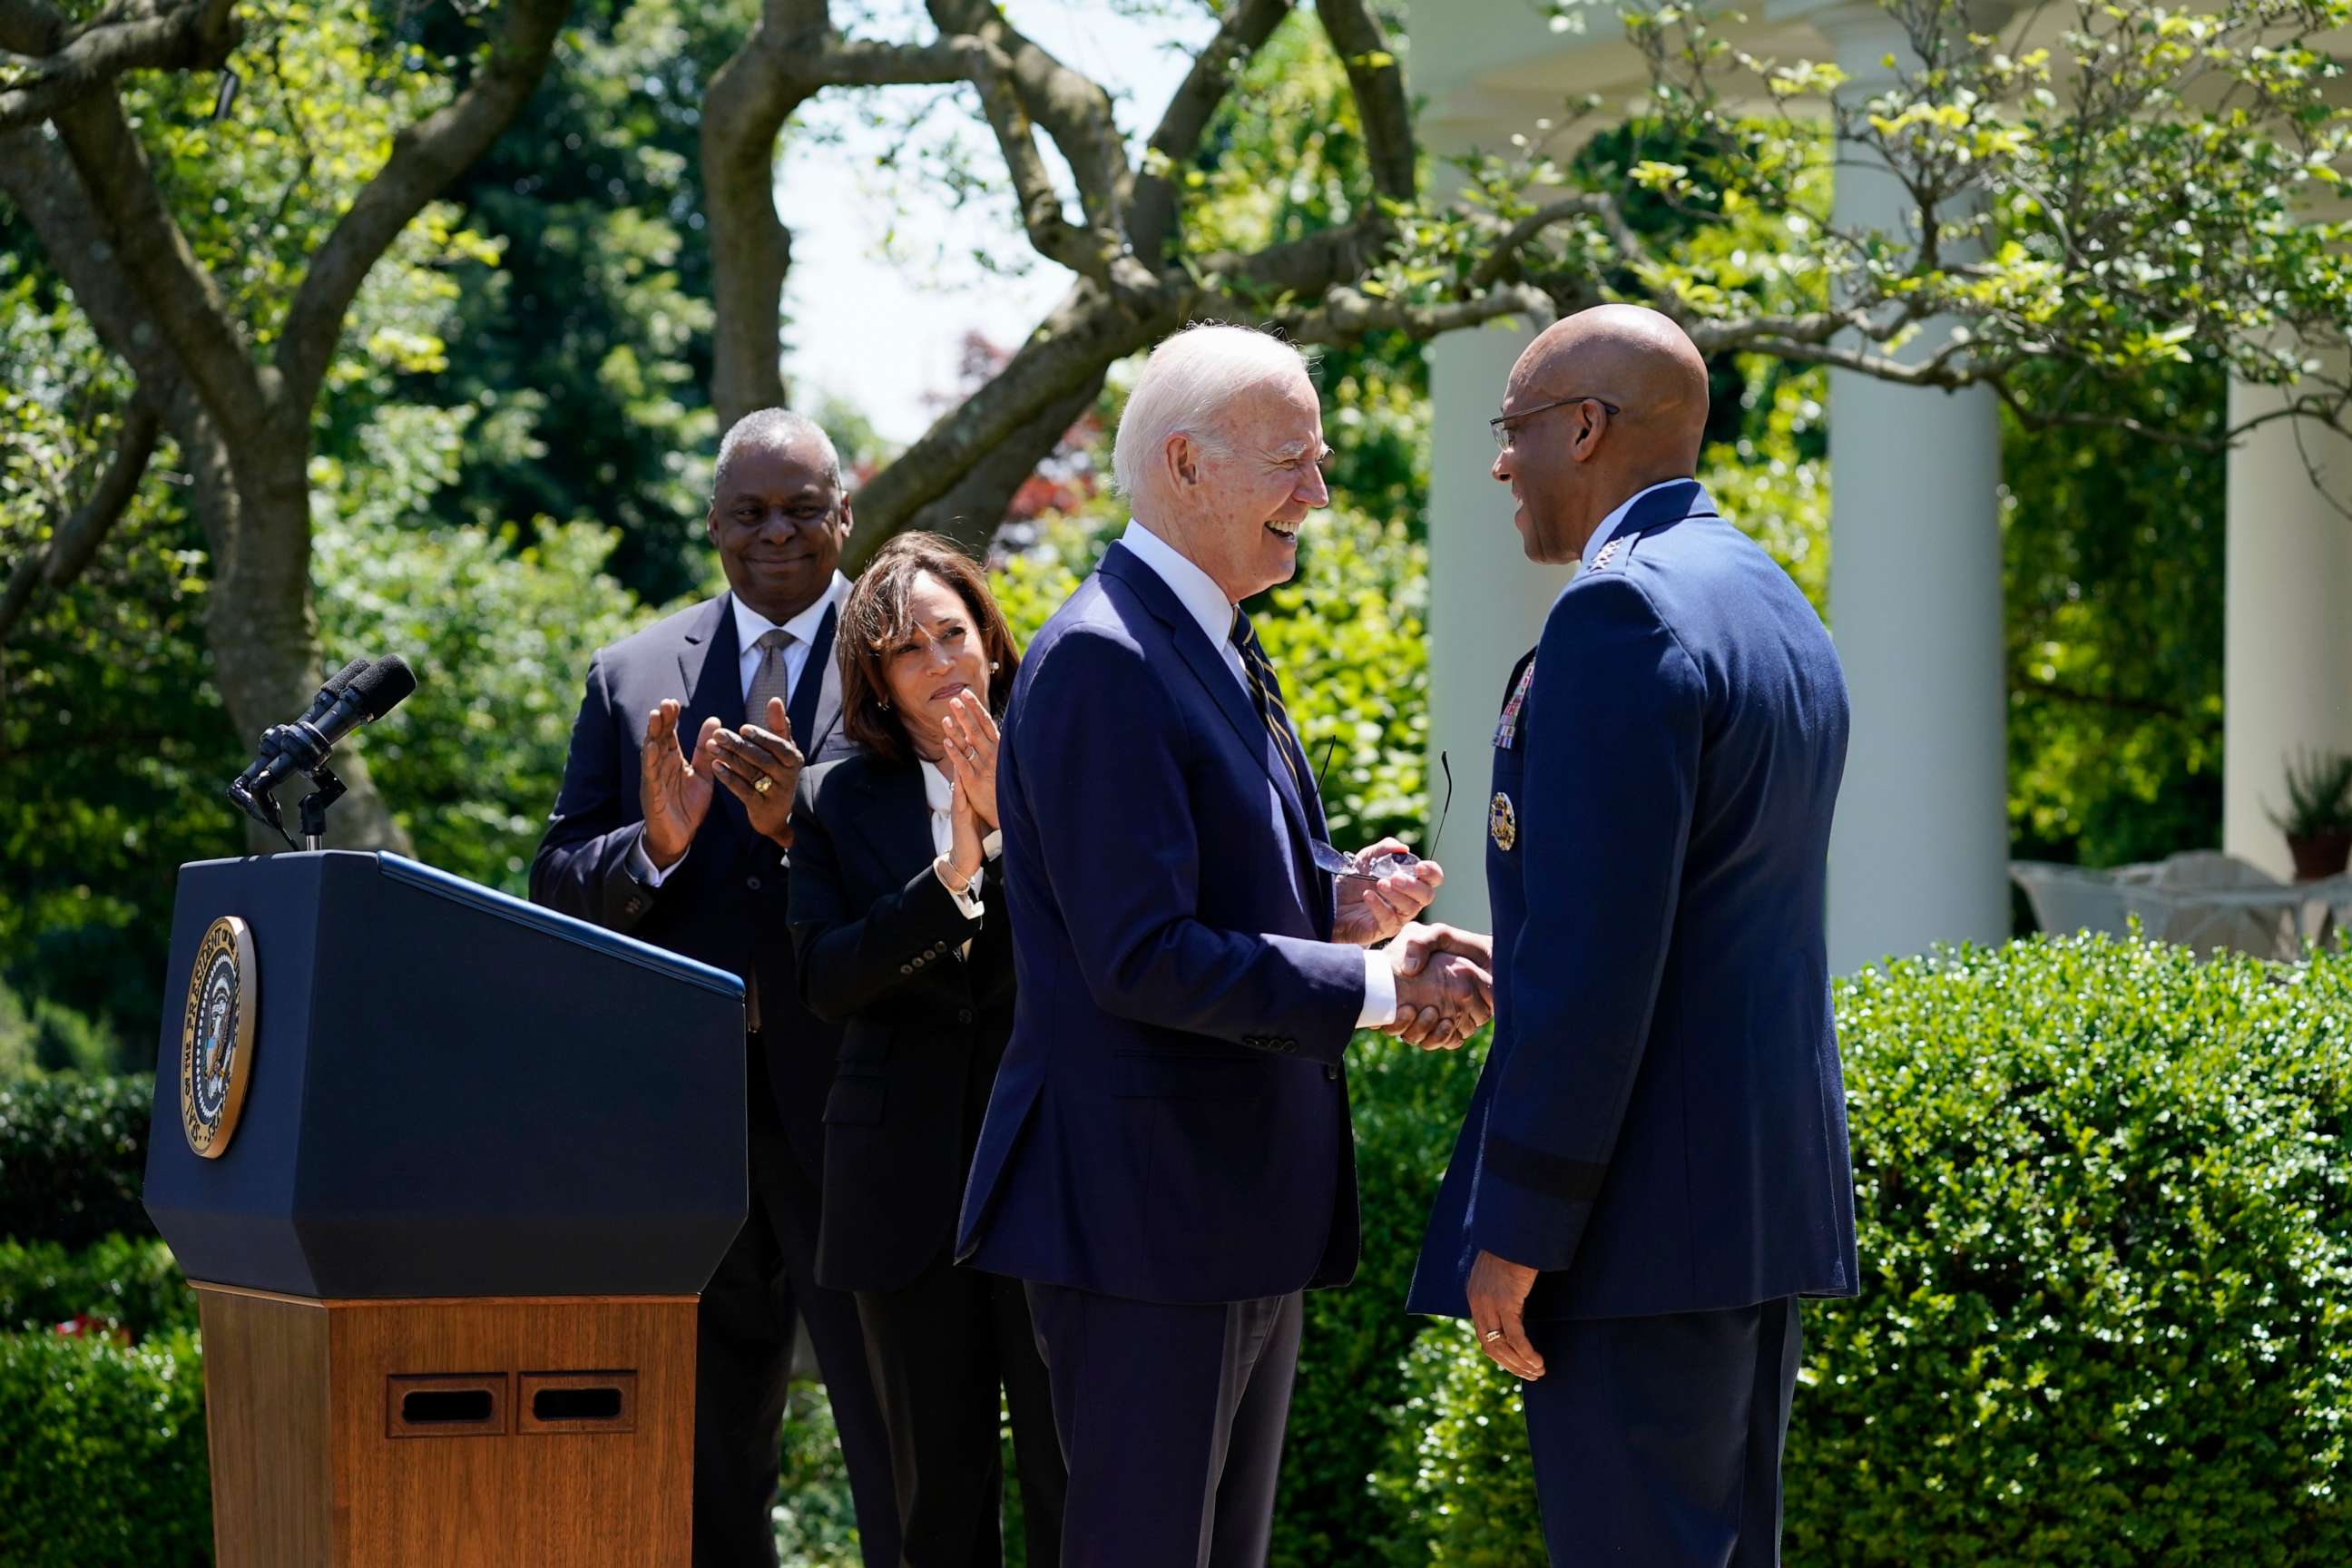 PHOTO: President Biden shakes hands with Air Force Chief of Staff Gen. Brown, Jr. after Biden announced his intent to nominate Brown to serve as the next Chairman of the Joint Chiefs of Staff in the Rose Garden of the White House, Washington, May 25, 2023